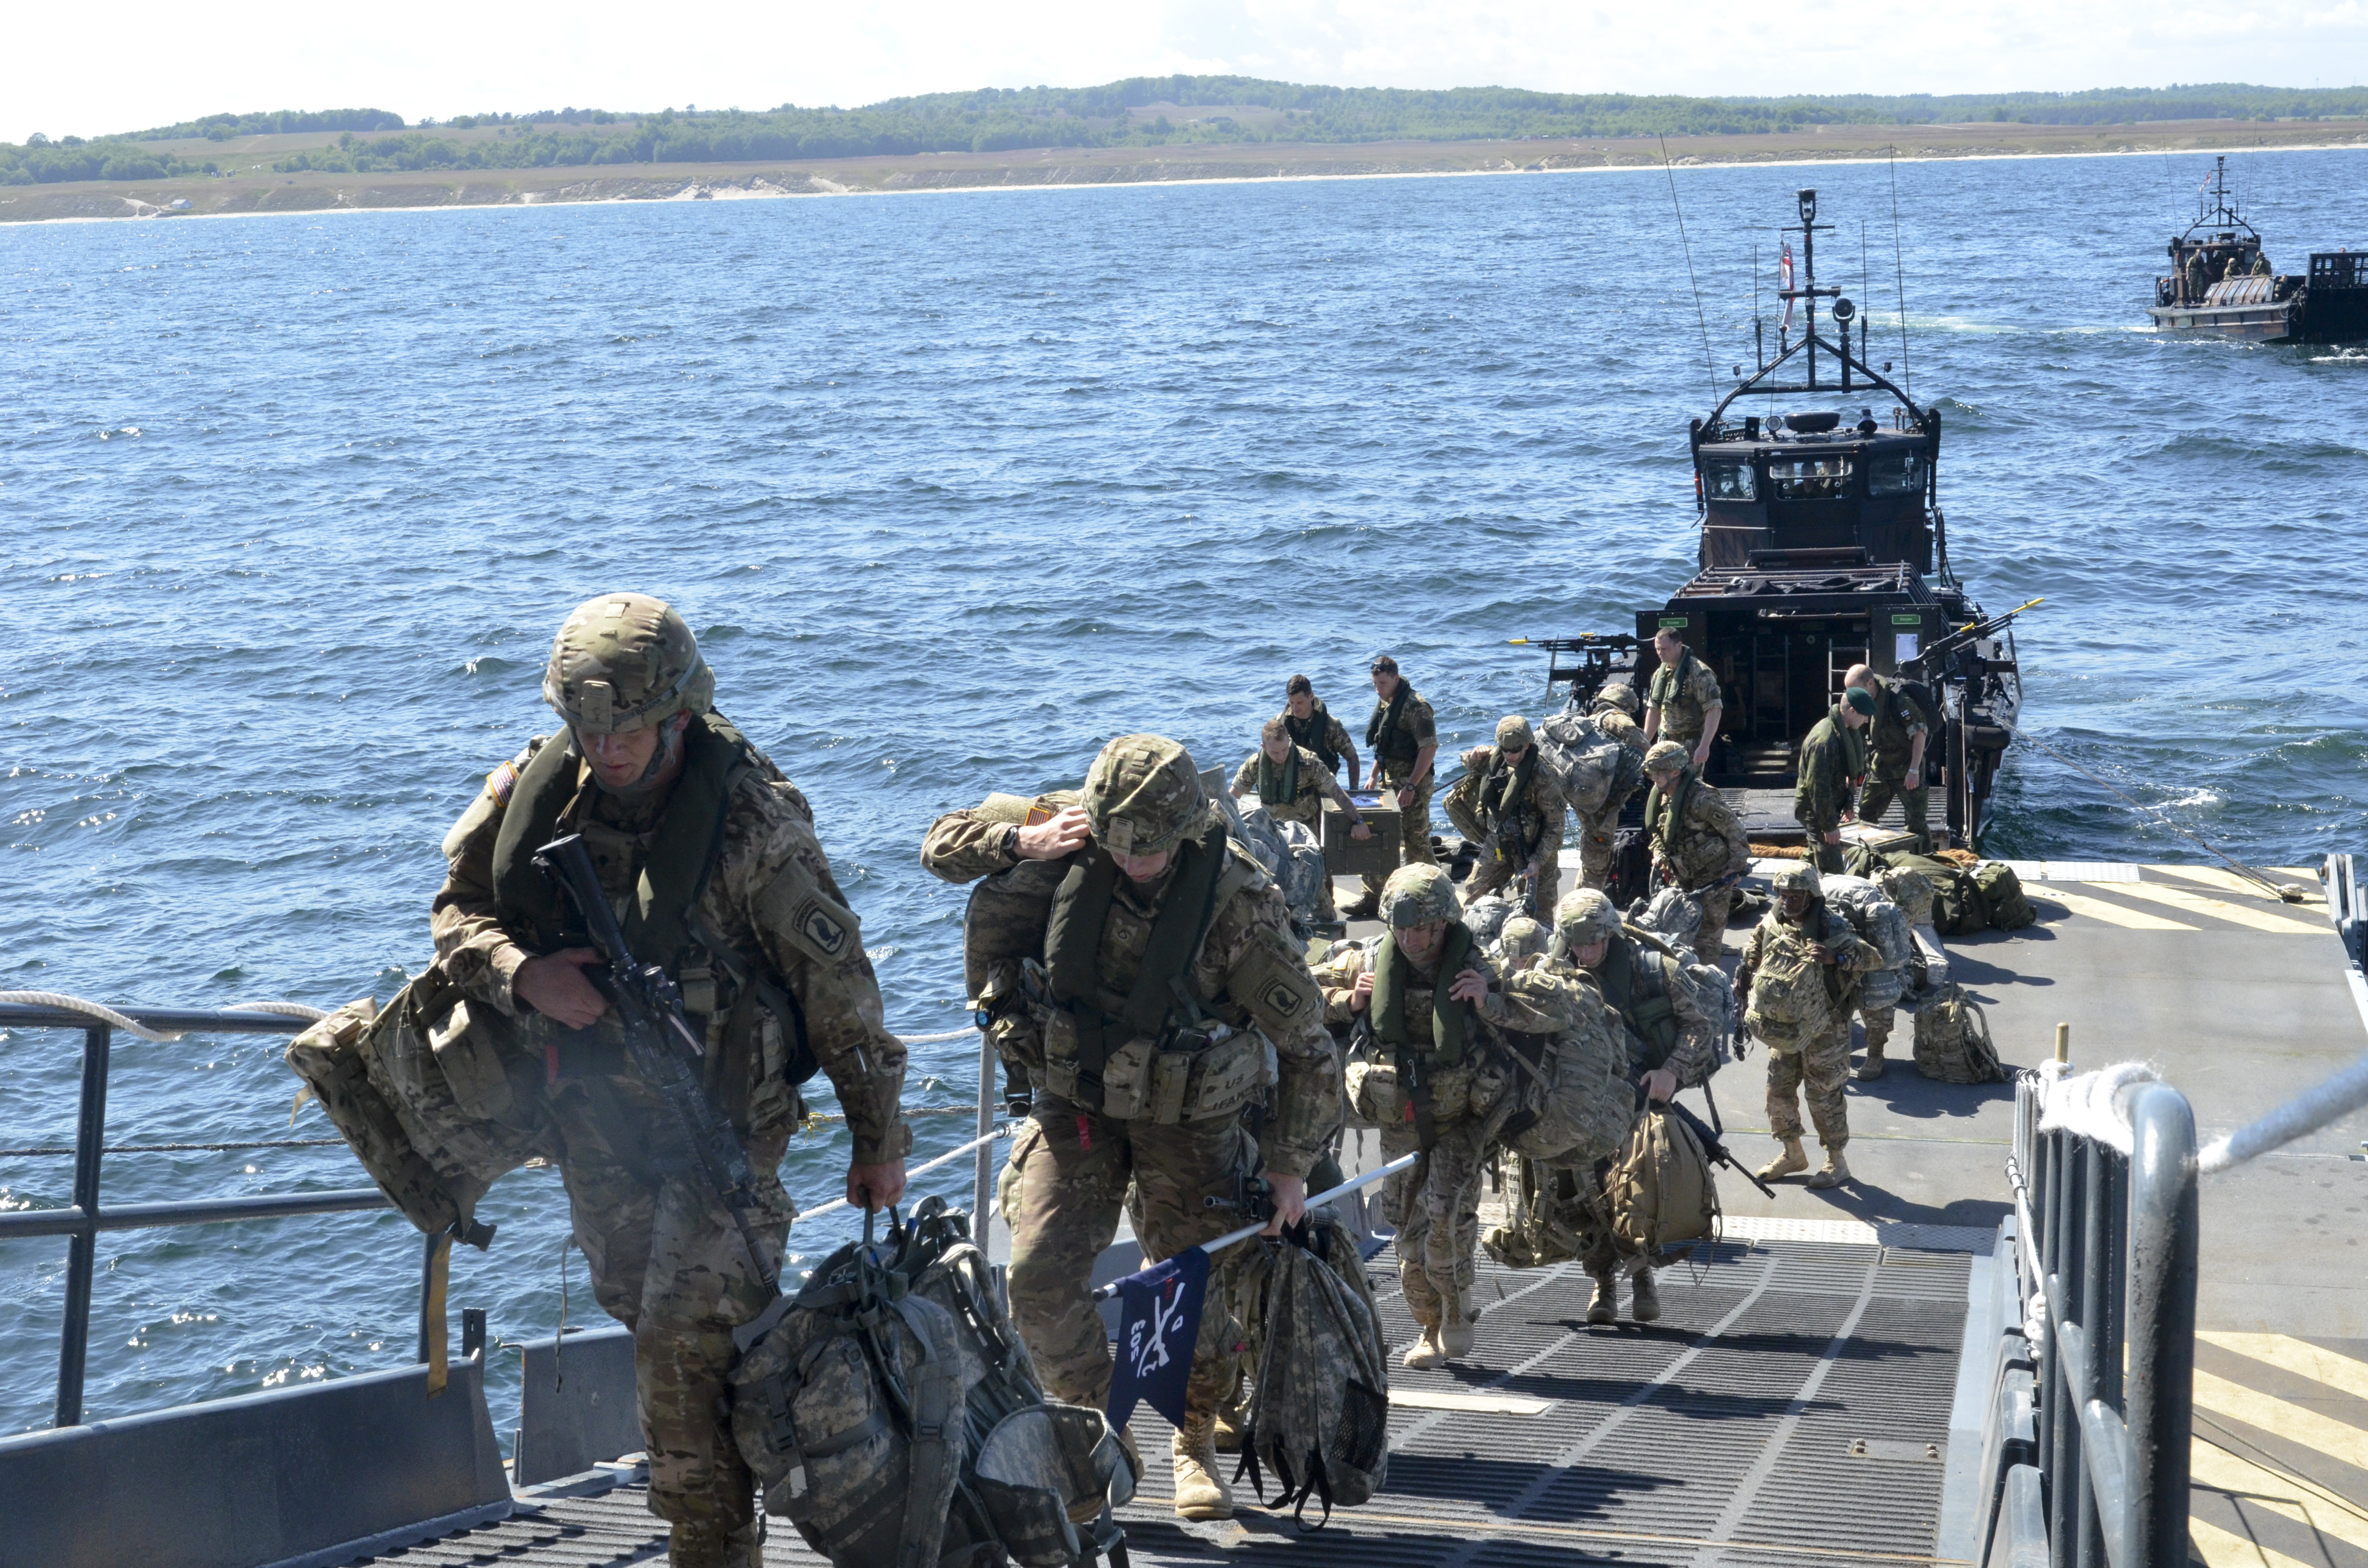 US Army paratroopers from the 173rd Airborne Brigade embark aboard the Royal Navy amphibious helicopter carrier HMS Ocean during exercise Baltic Operations (BALTOPS) 2015 on June 9, 2015. US Navy Photo